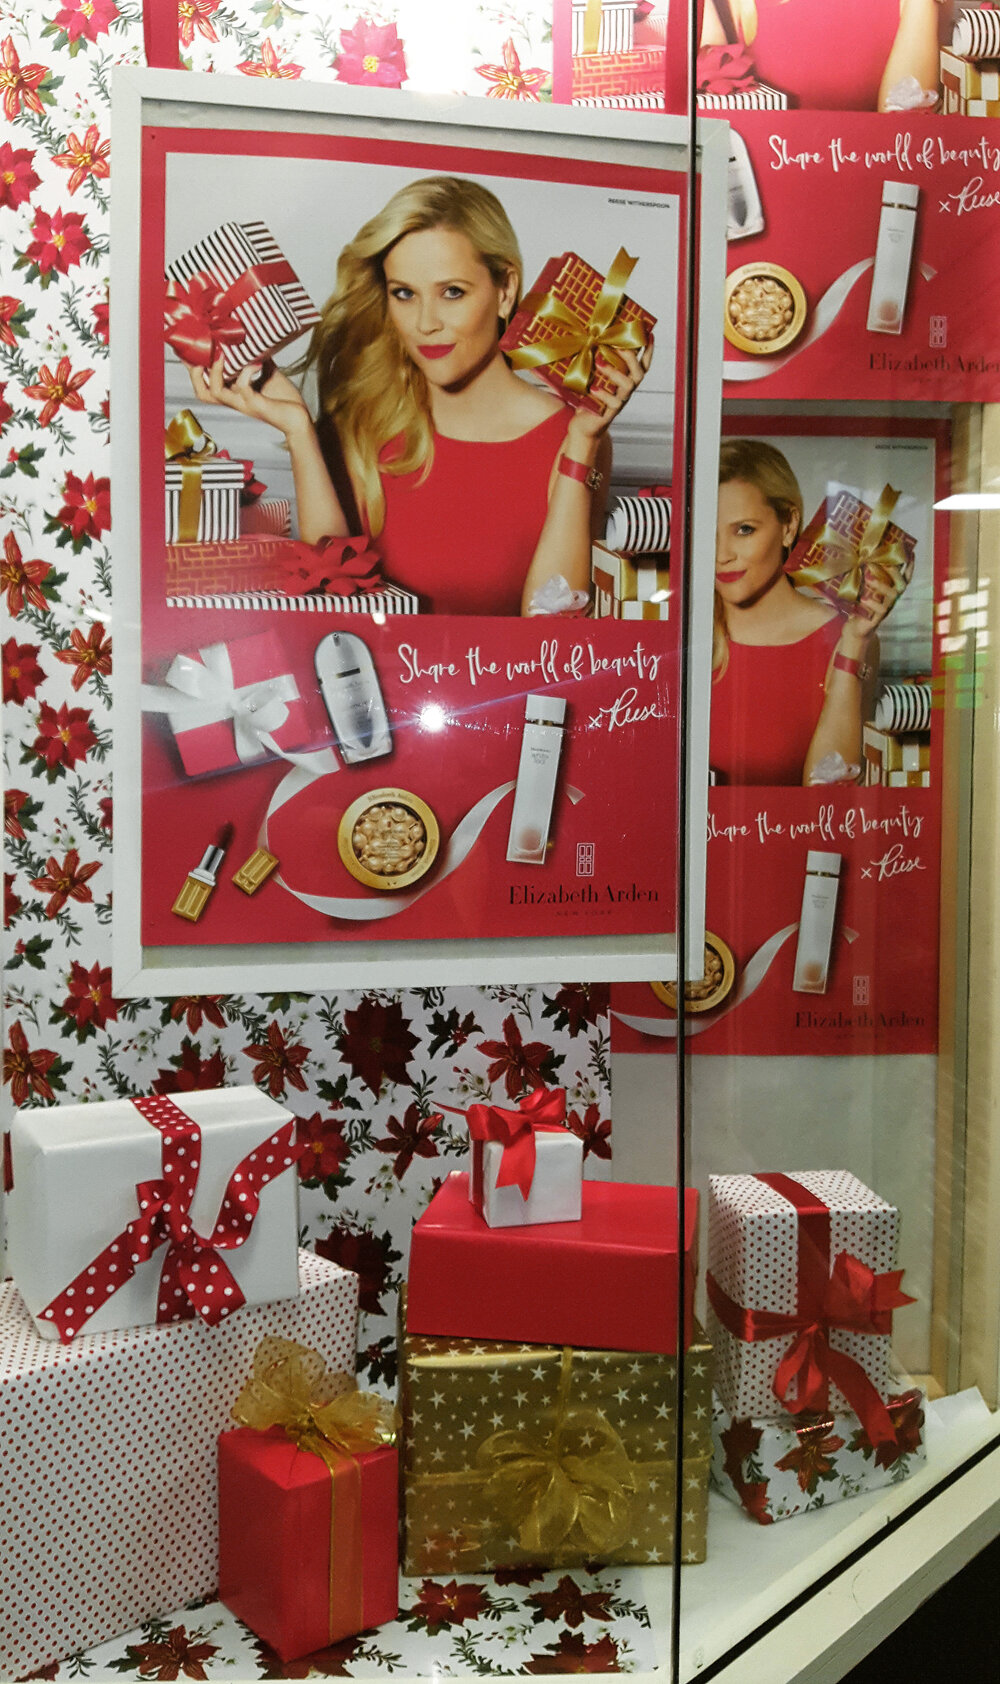 Reece Witherspoon for Elizabeth Arden